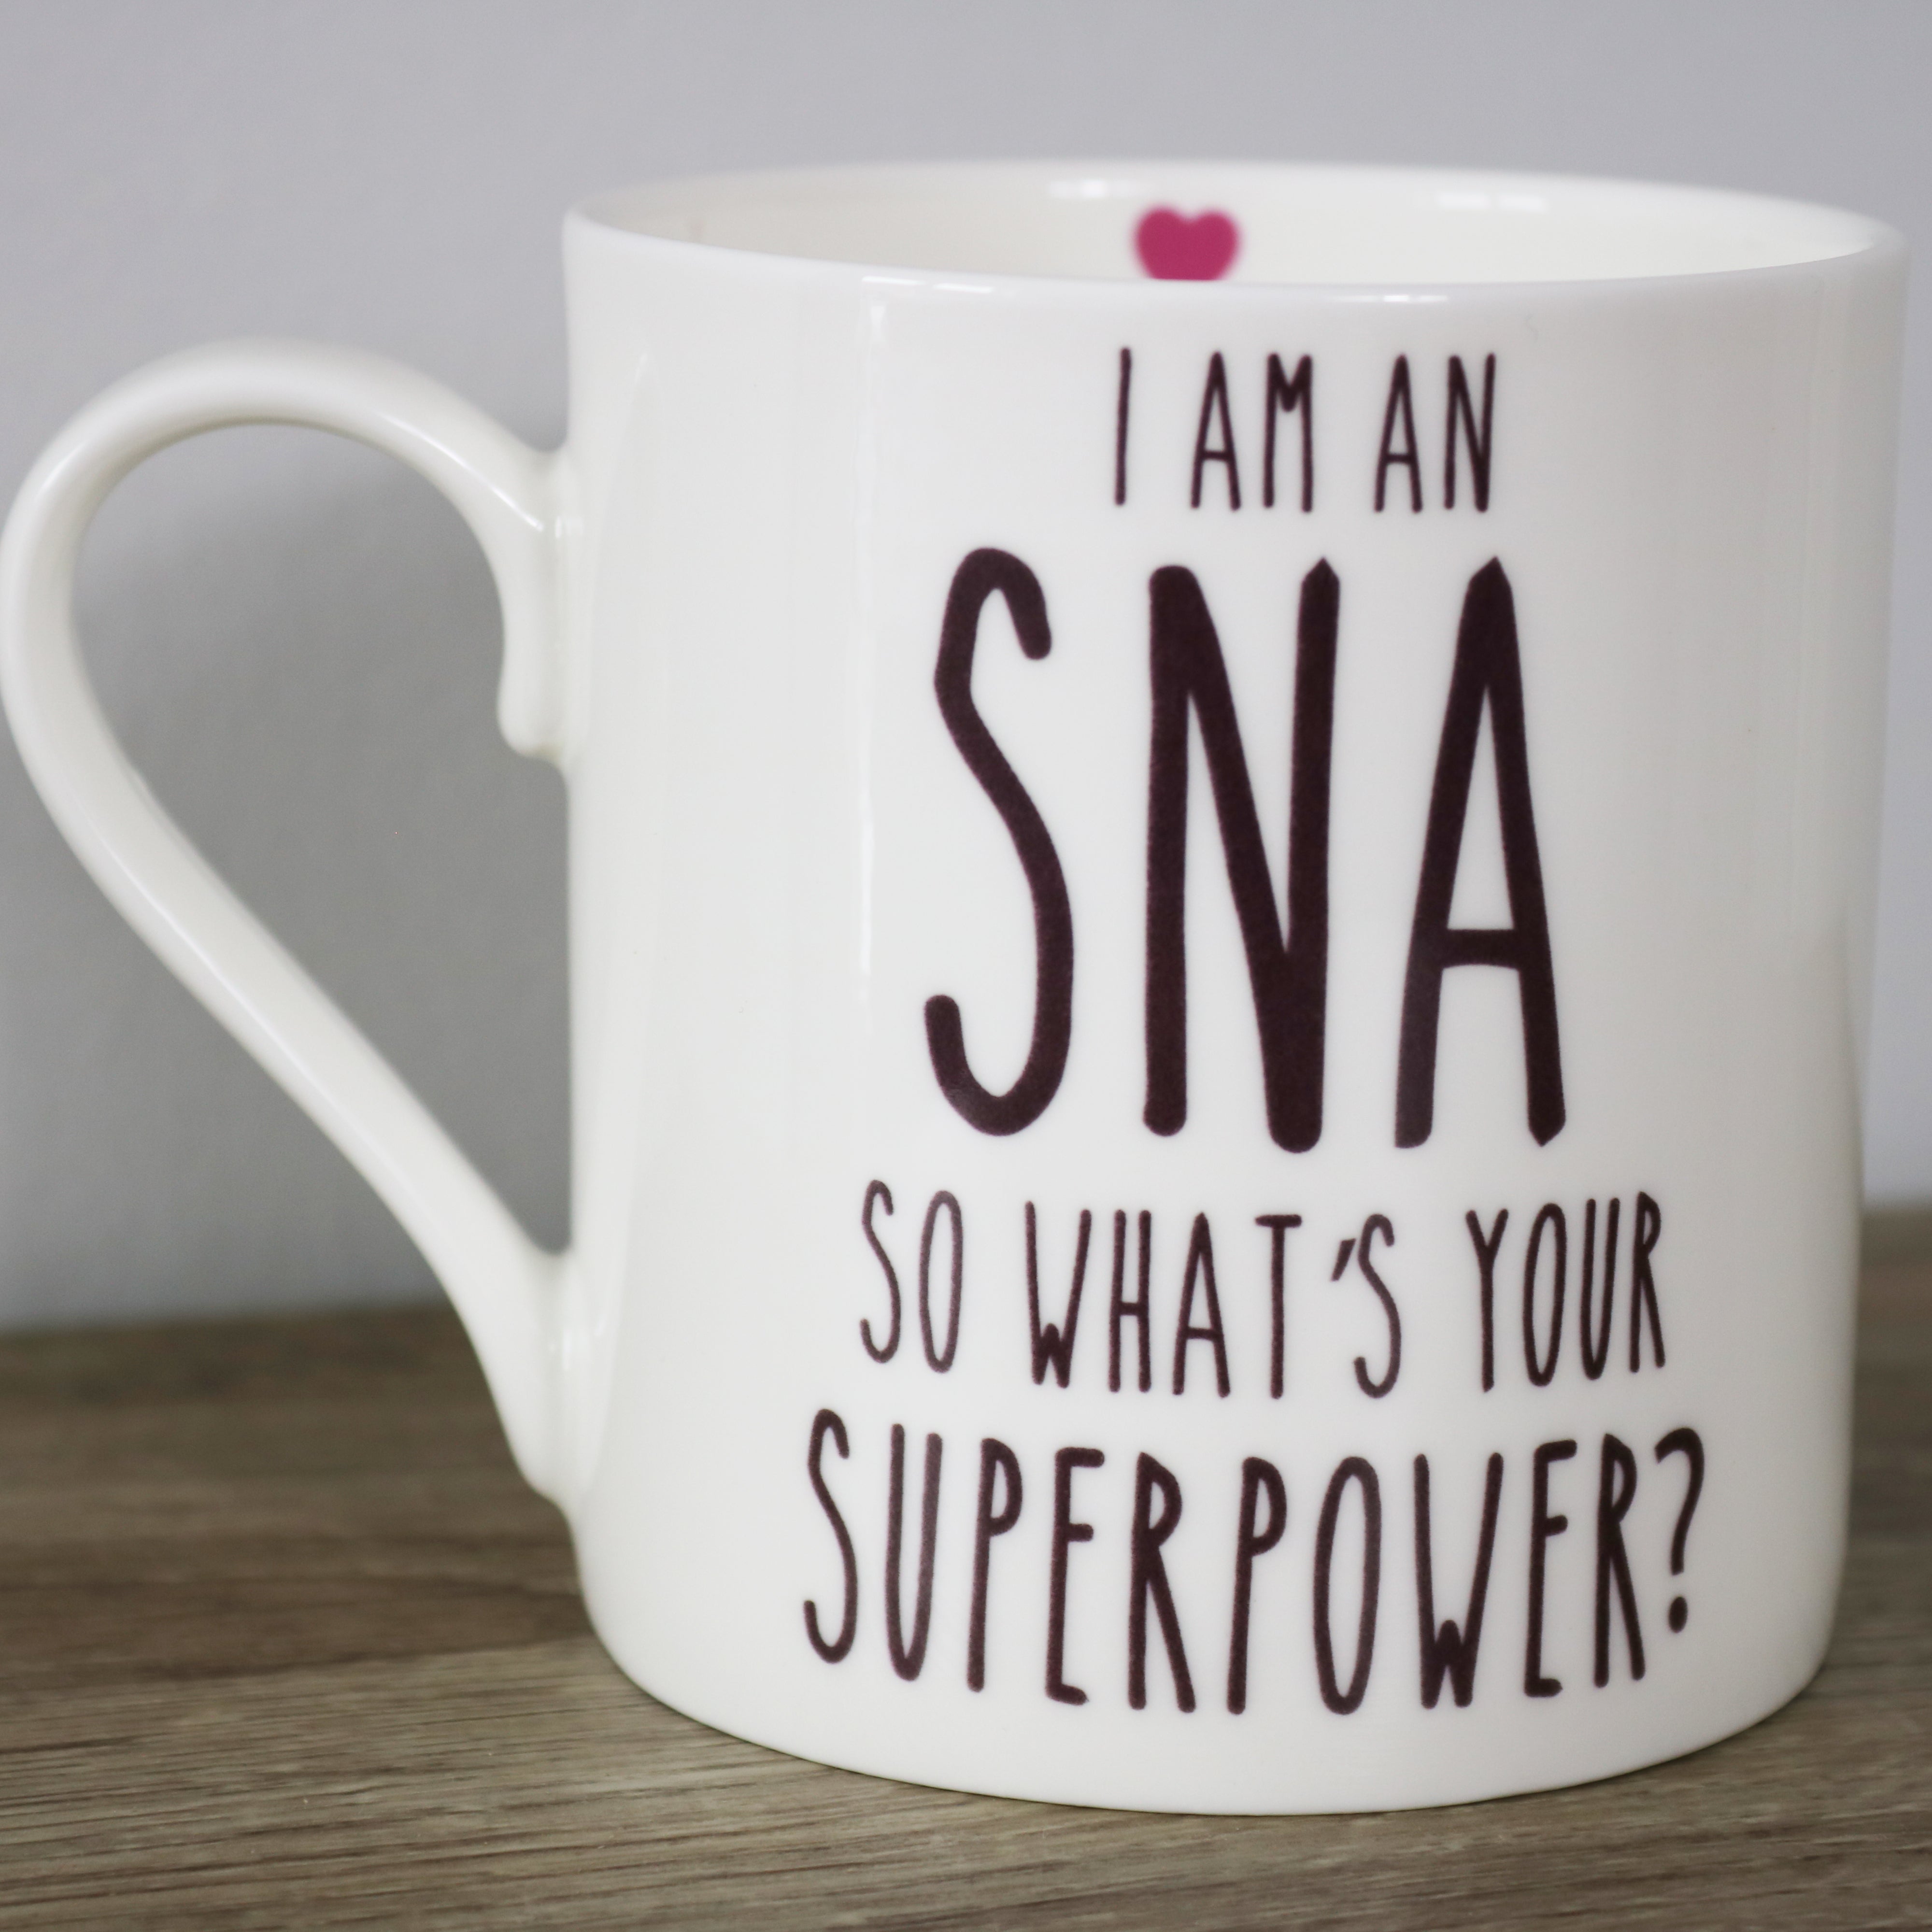 I'm An SNA, What's Your Superpower?